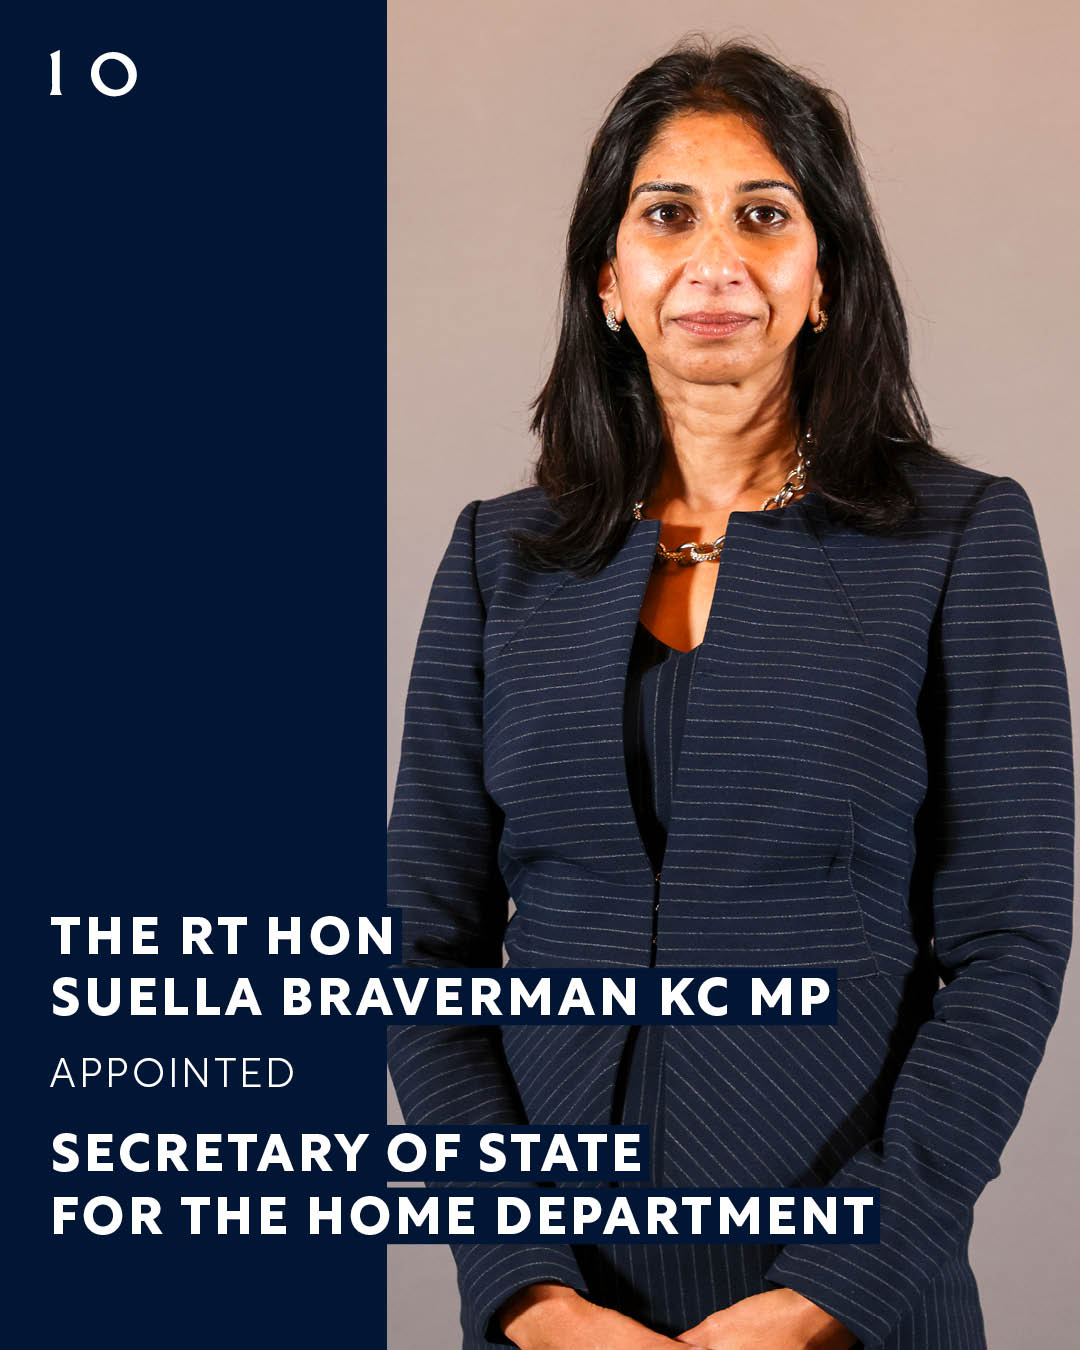 The Rt Hon Suella Braverman appointed Secretary of State for the Home Department